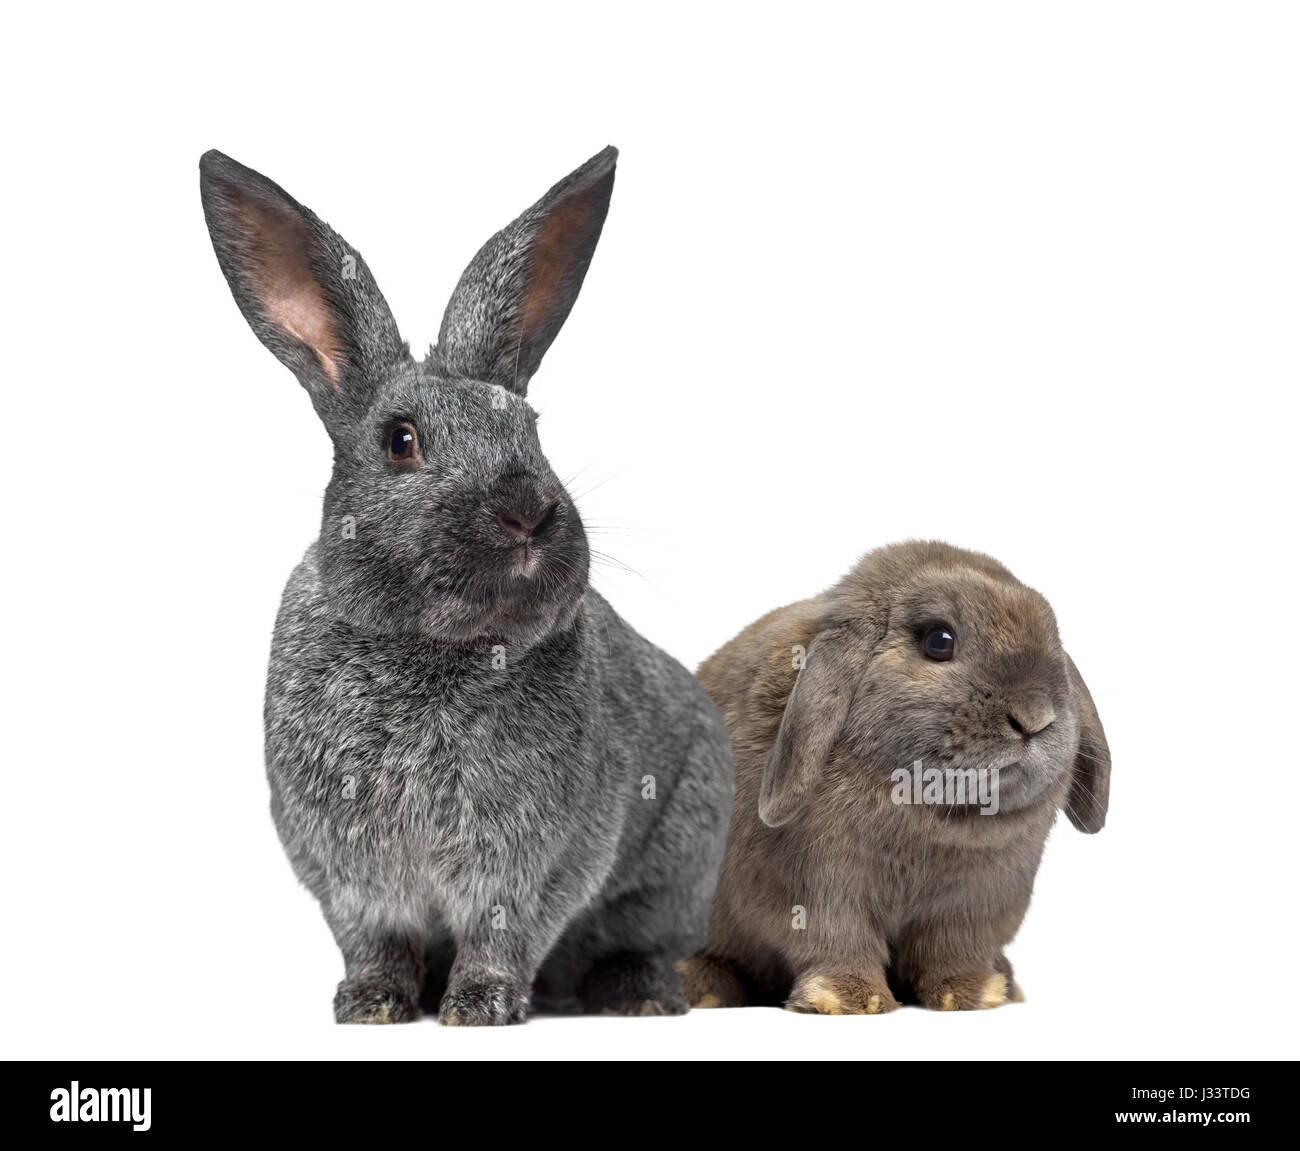 Argente rabbit and Holland Lop rabbit isolated on white Stock Photo